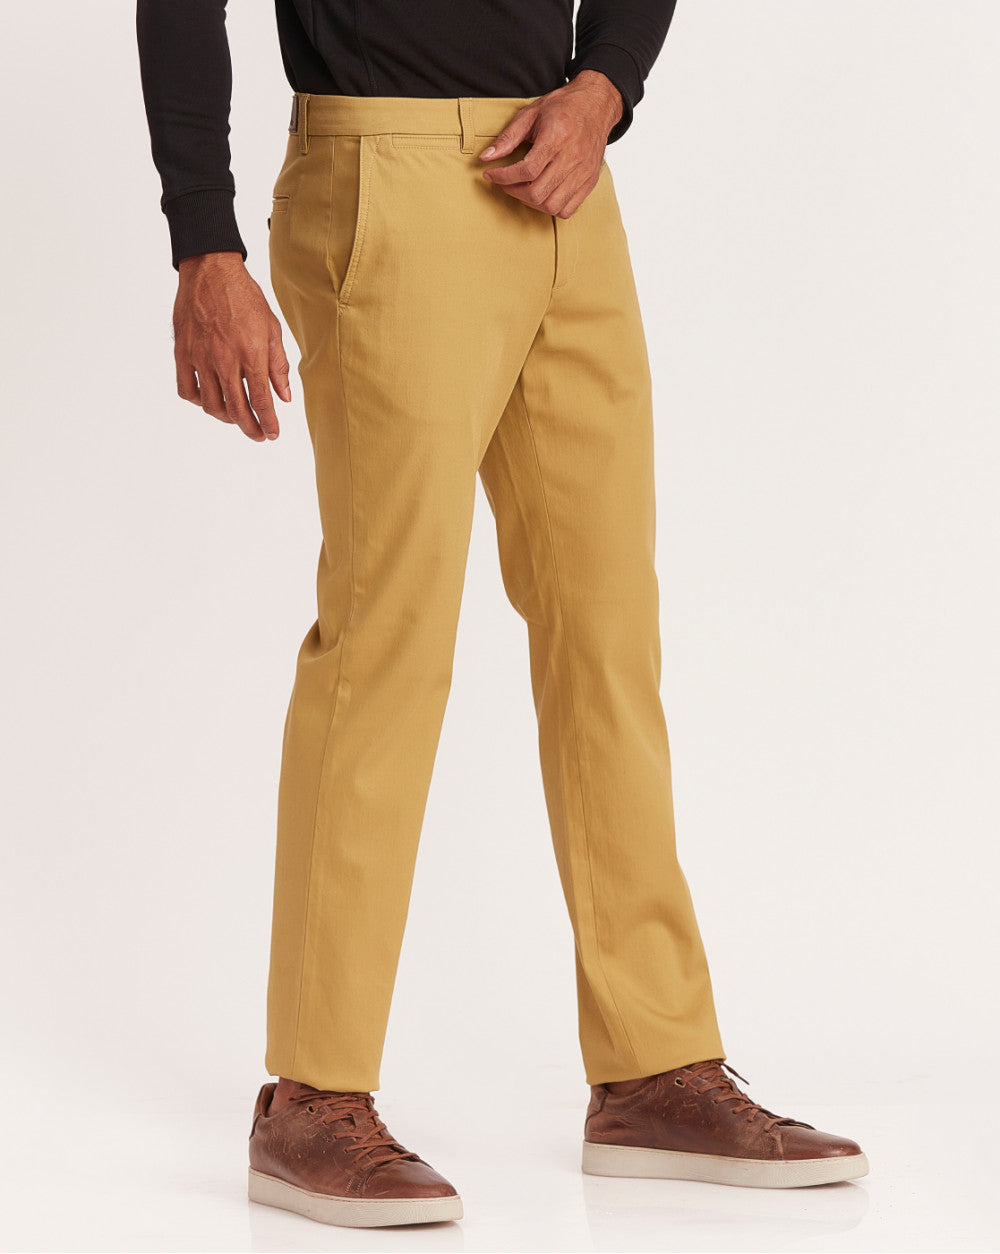 Regular Fit Fit Luxe Chinos - Granola Khaki